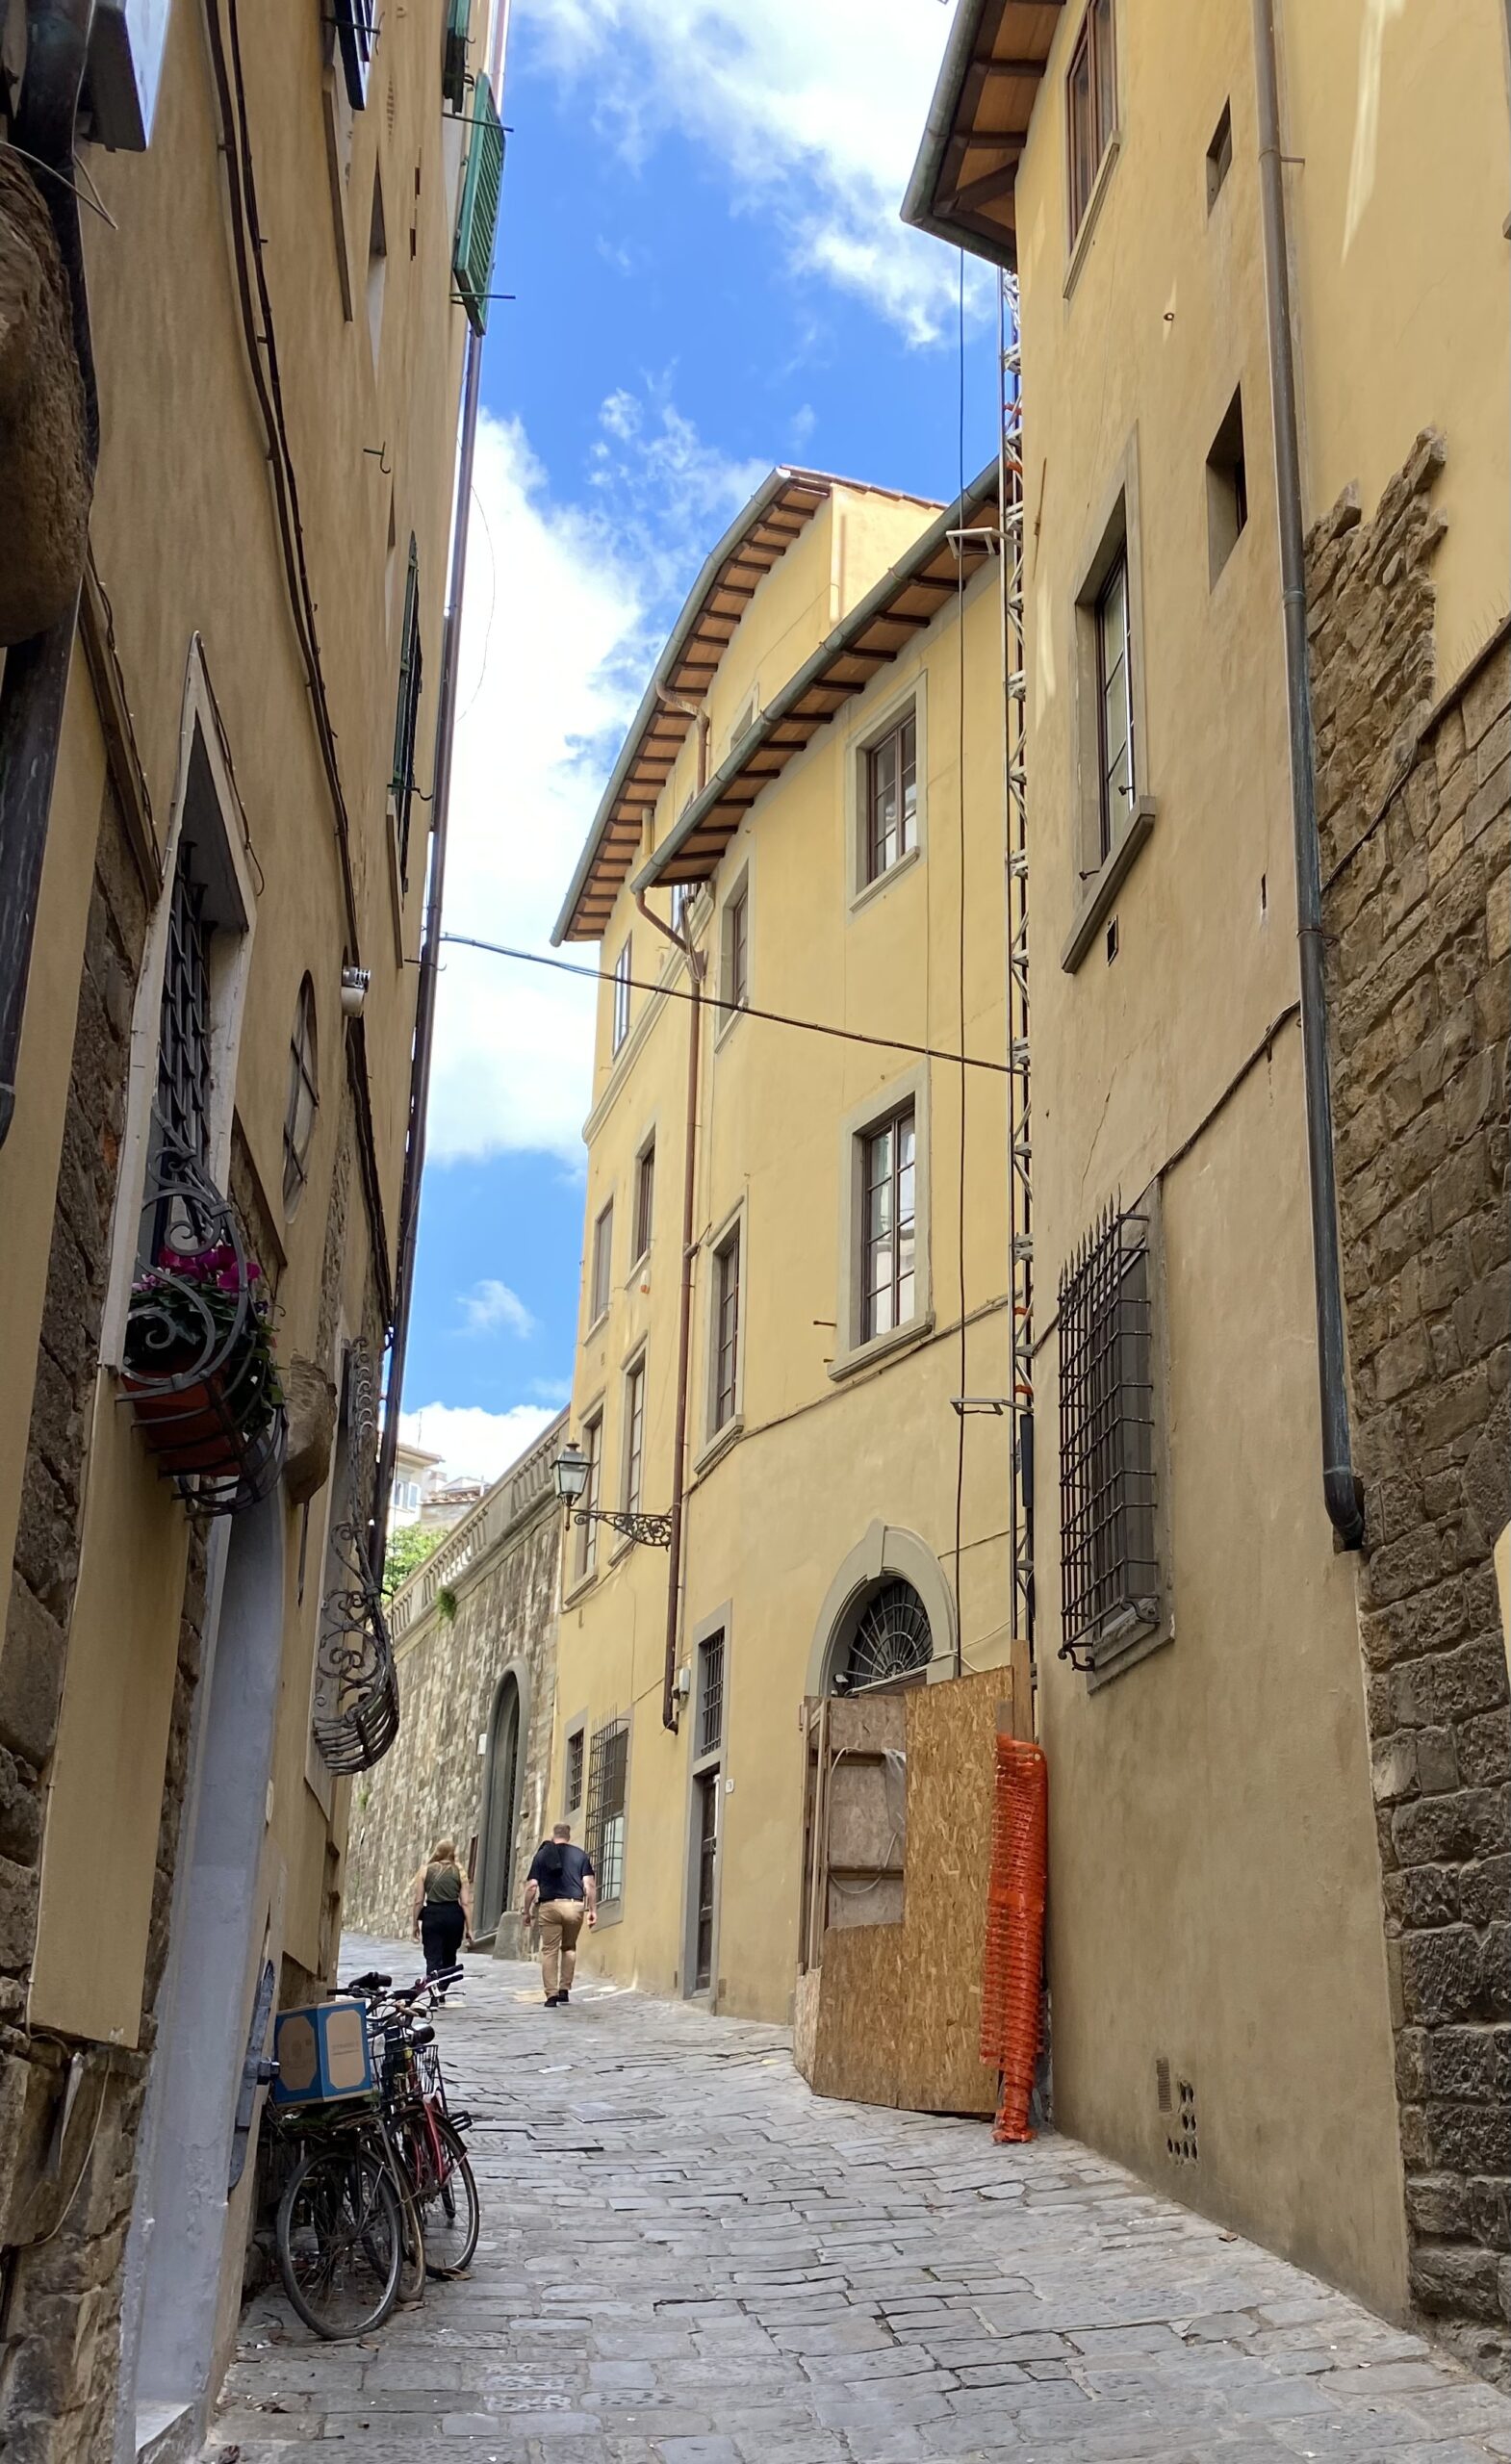 Photograph of Costa San Giorgio's cobble stones and tall, tight houses.